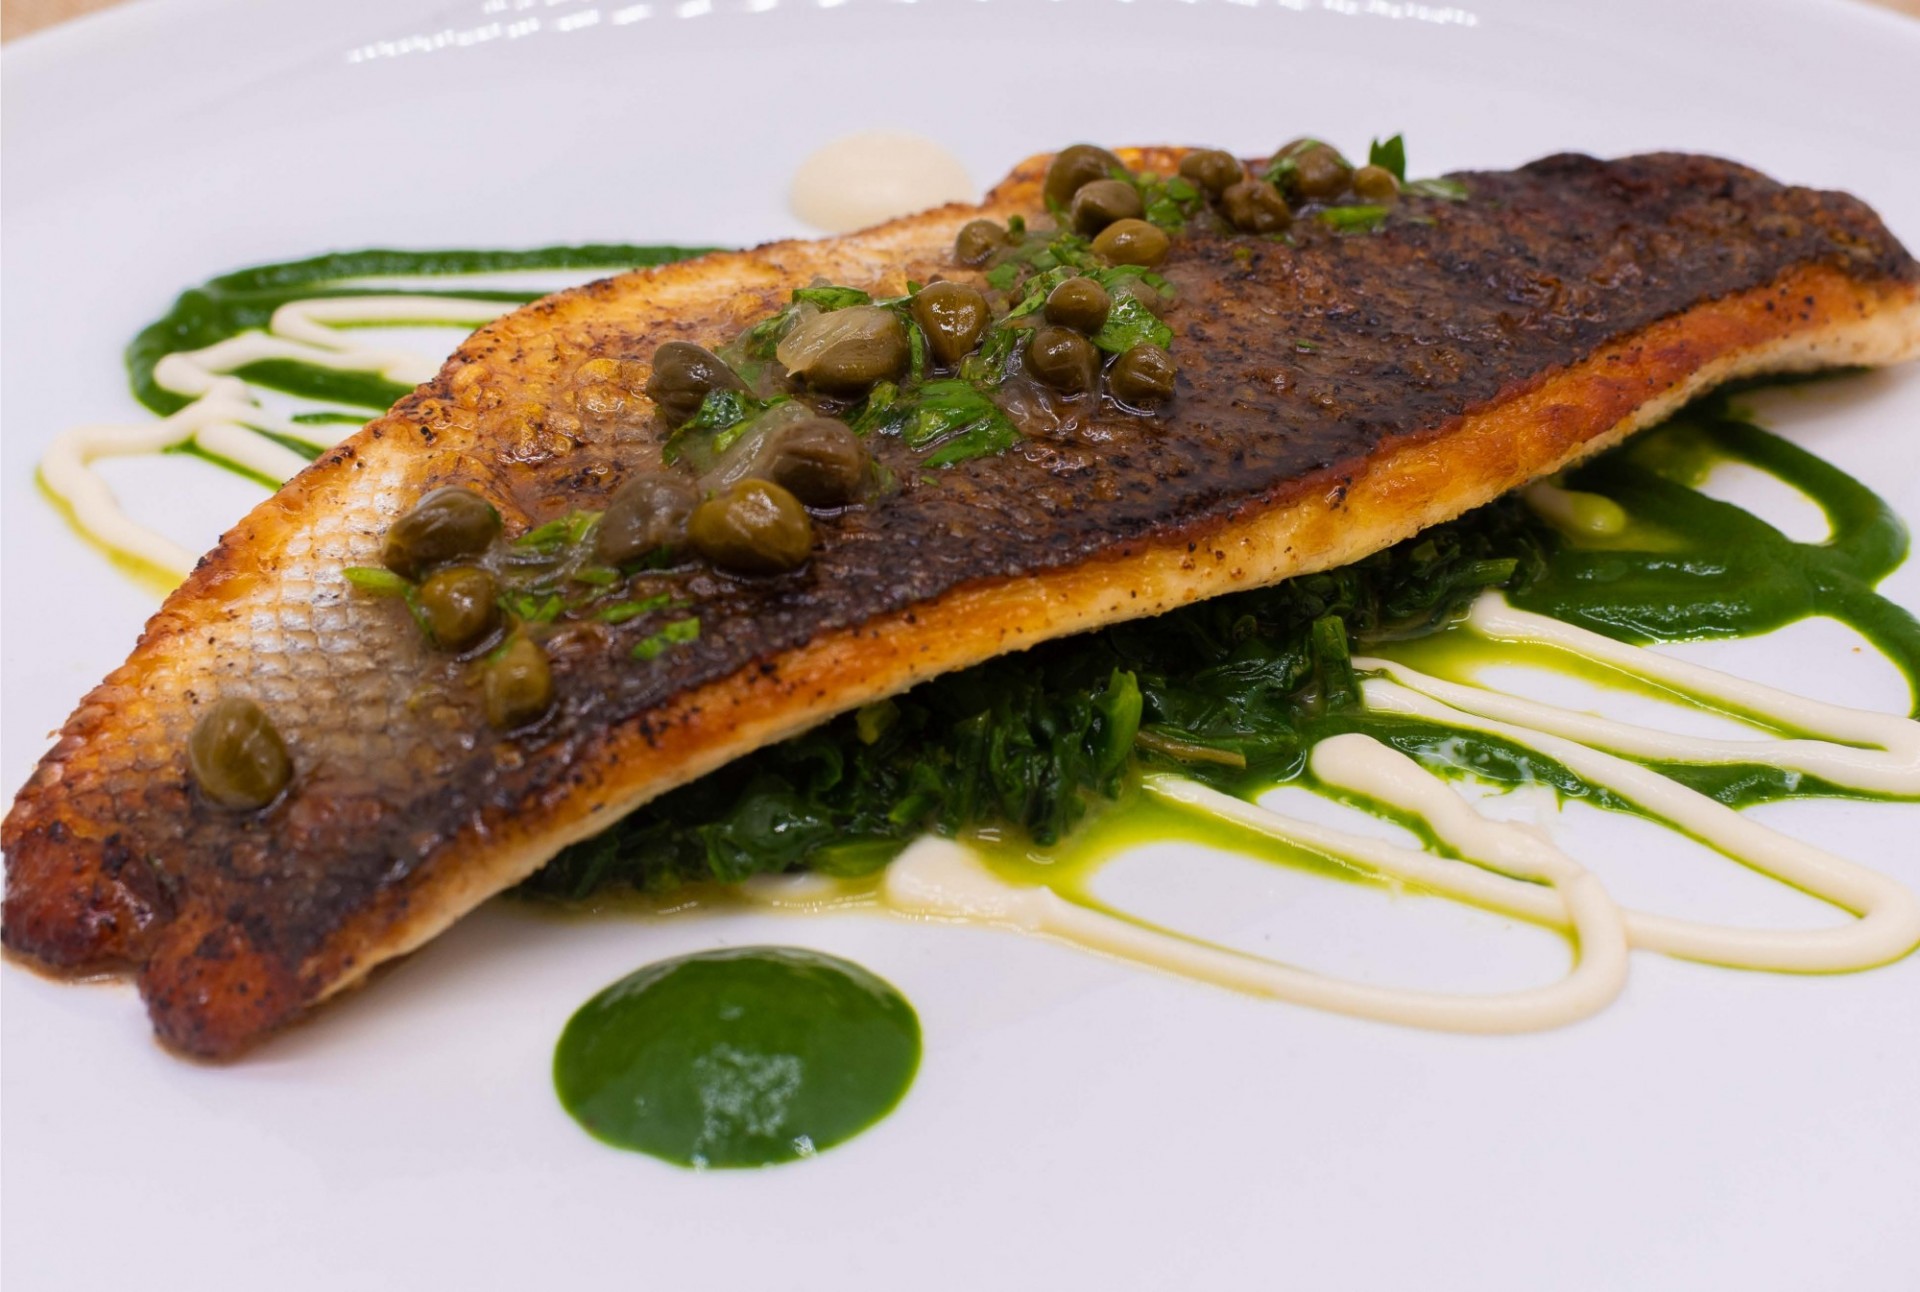 Pan seared trout on a bed of spinach